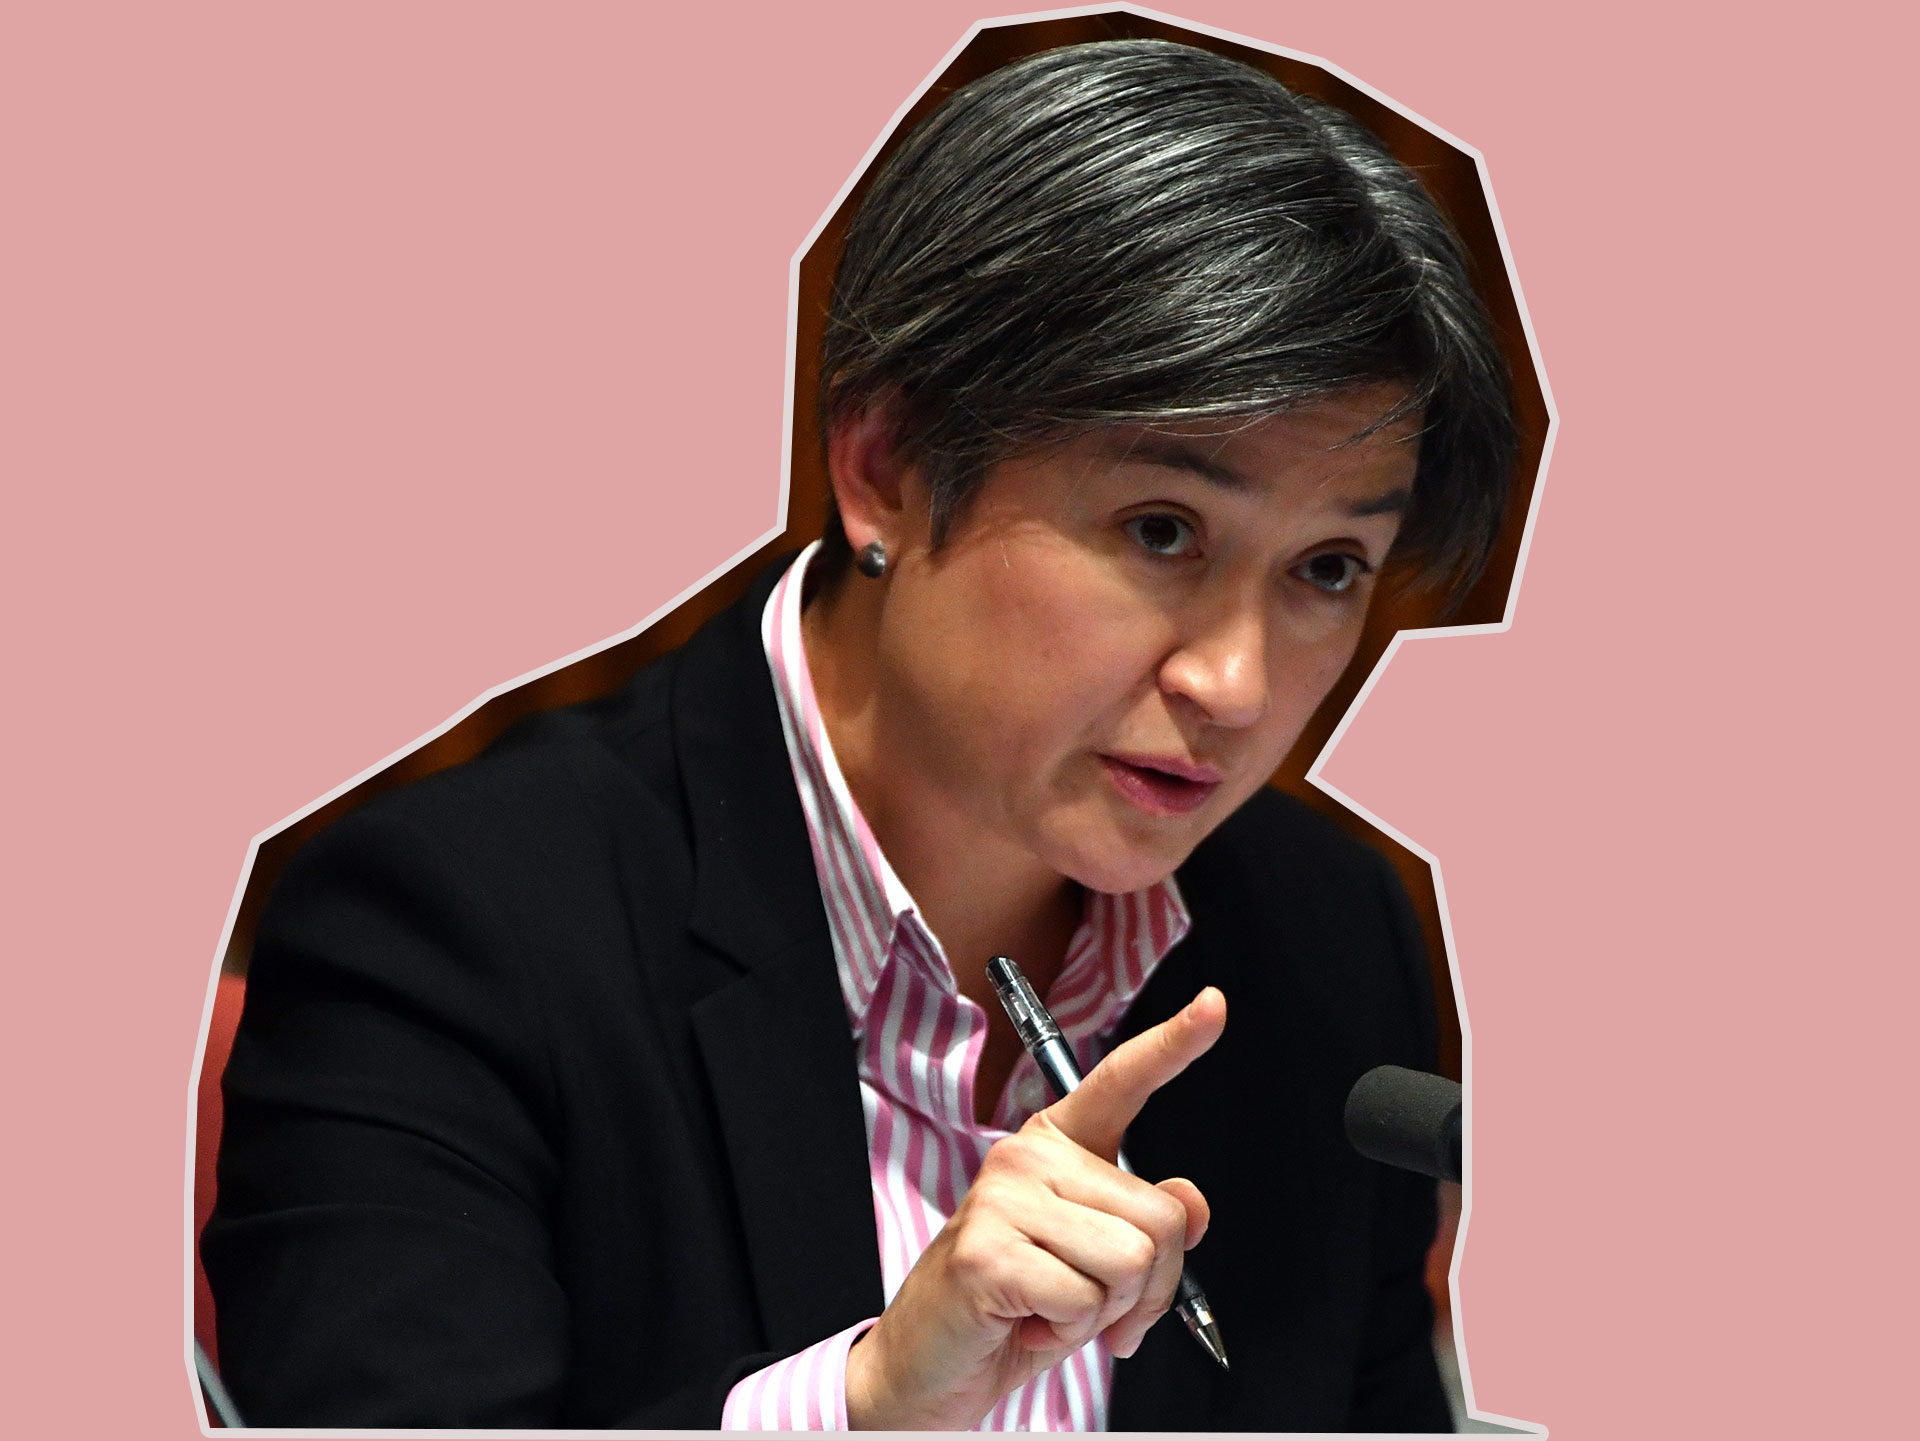 Penny Wong puts her manterrupting colleague in his place